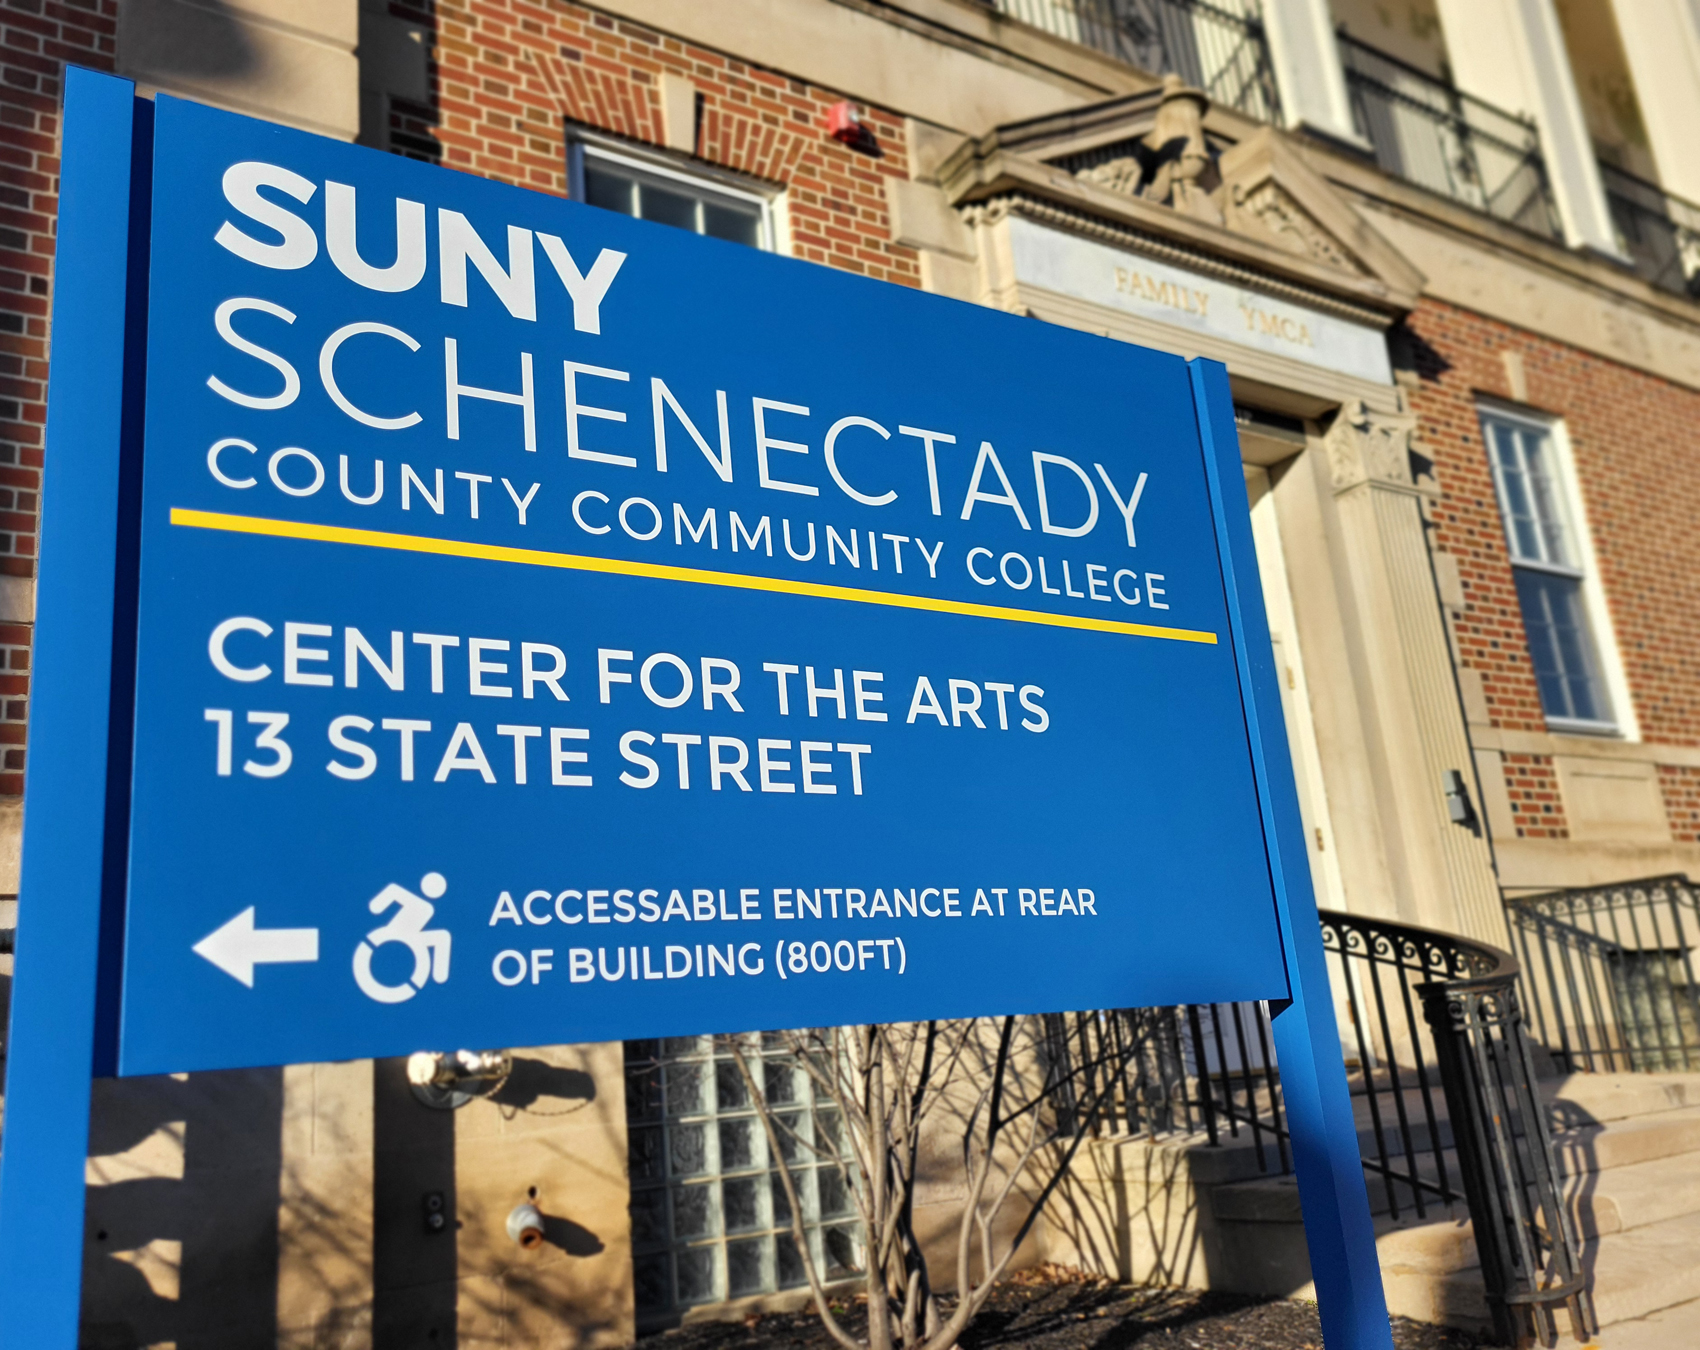 SUNY Schenectady Center for the Arts outdoor sign